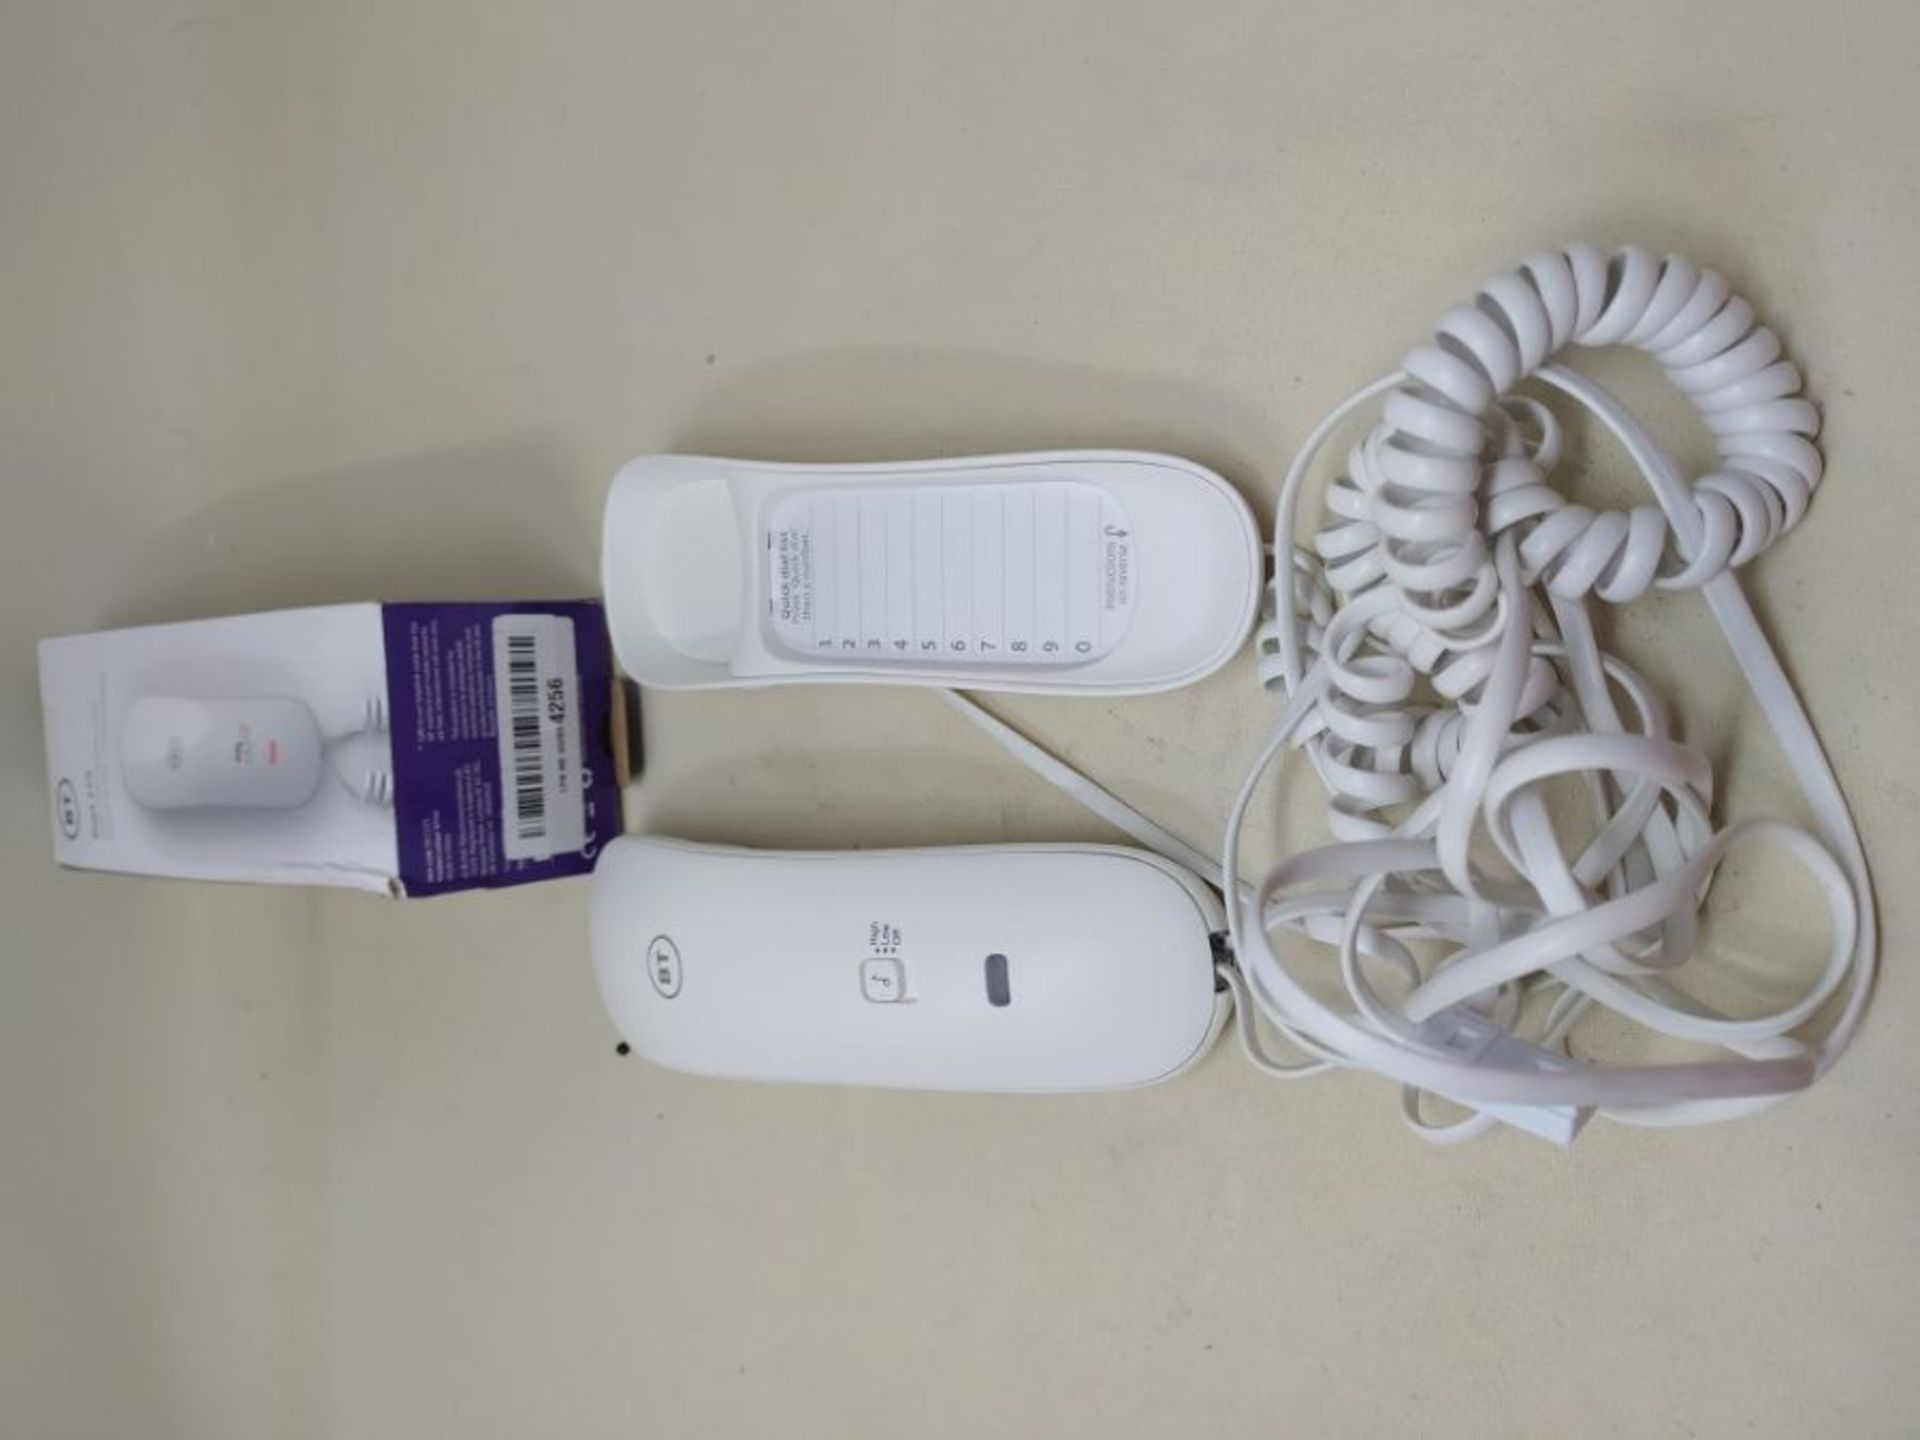 BT Duet 210 Corded Telephone, White - Image 2 of 2